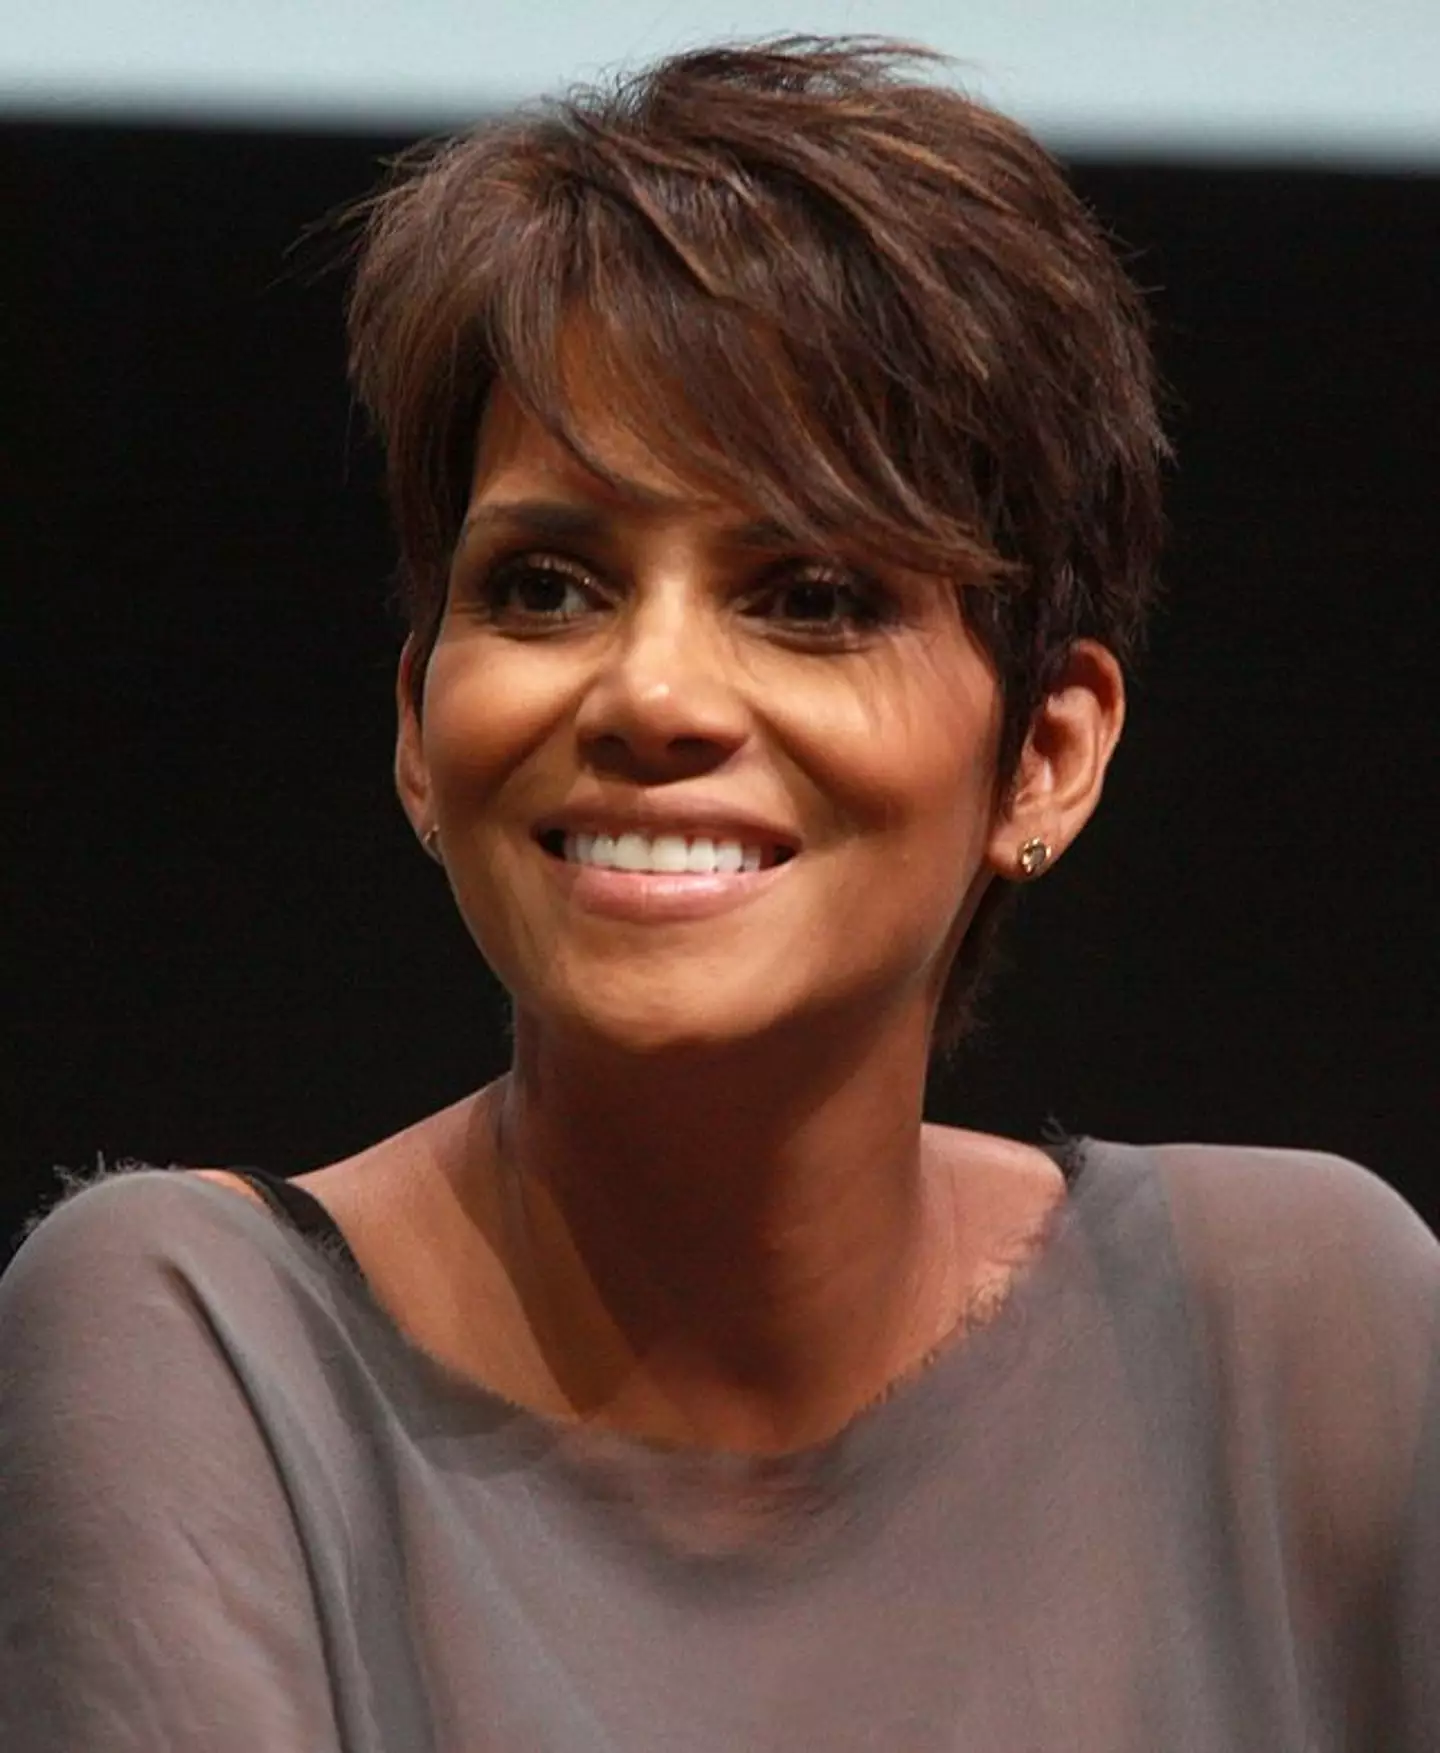 Halle Berry was hailed the Best Actress at the 2002 Academy Awards.